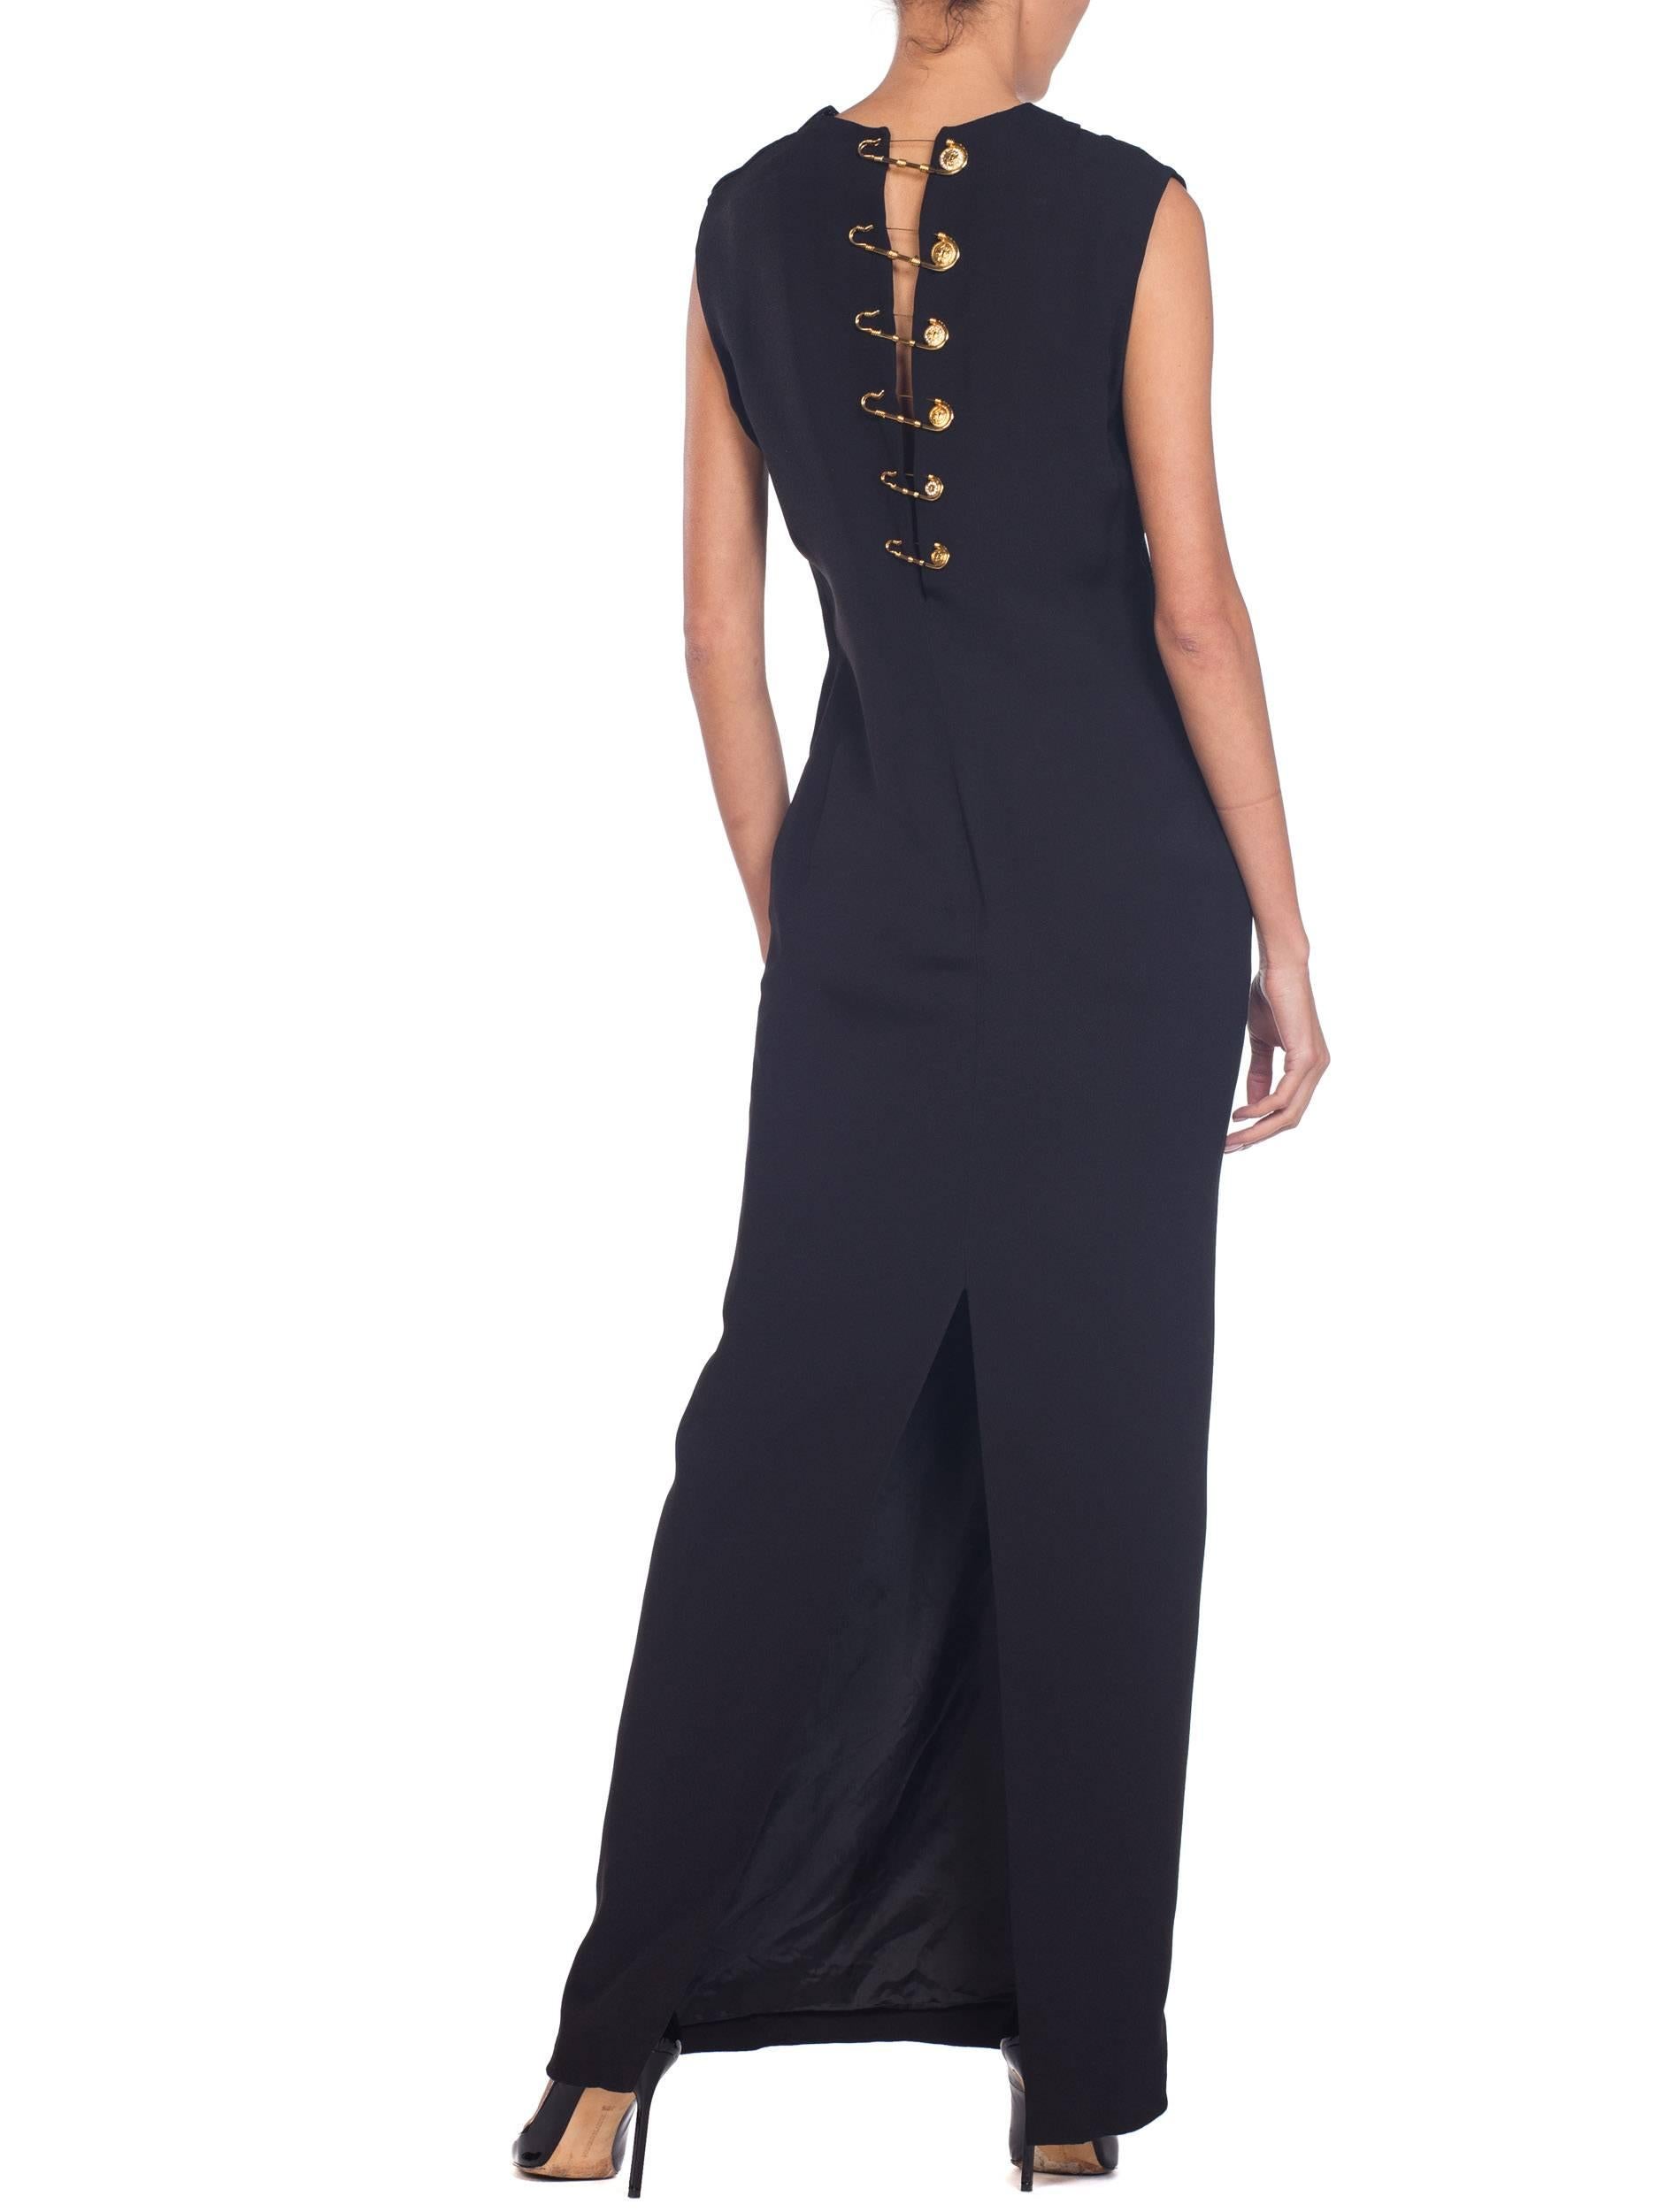 1990S GIANNI VERSACE Black Silk Crepe Gold Safey Pin Gown For Sale 3